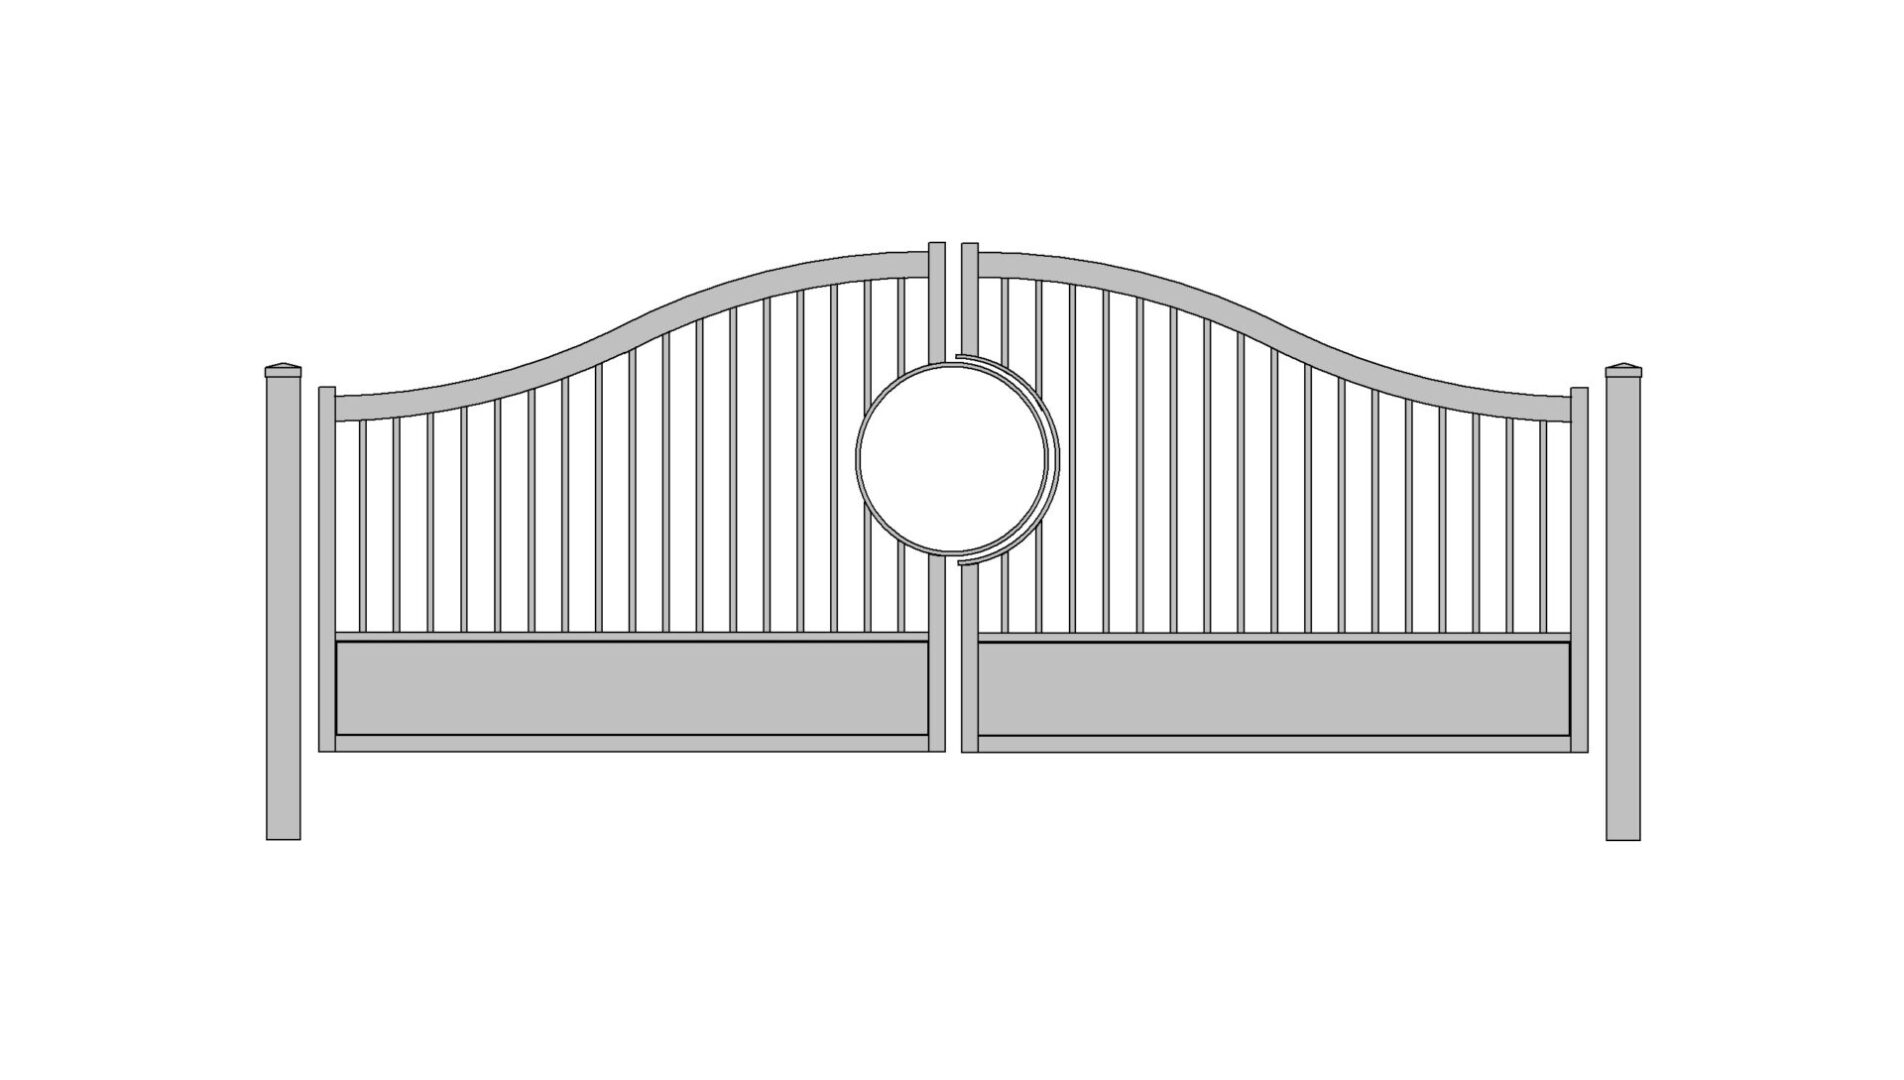 A drawing of an open gate with a circular window.